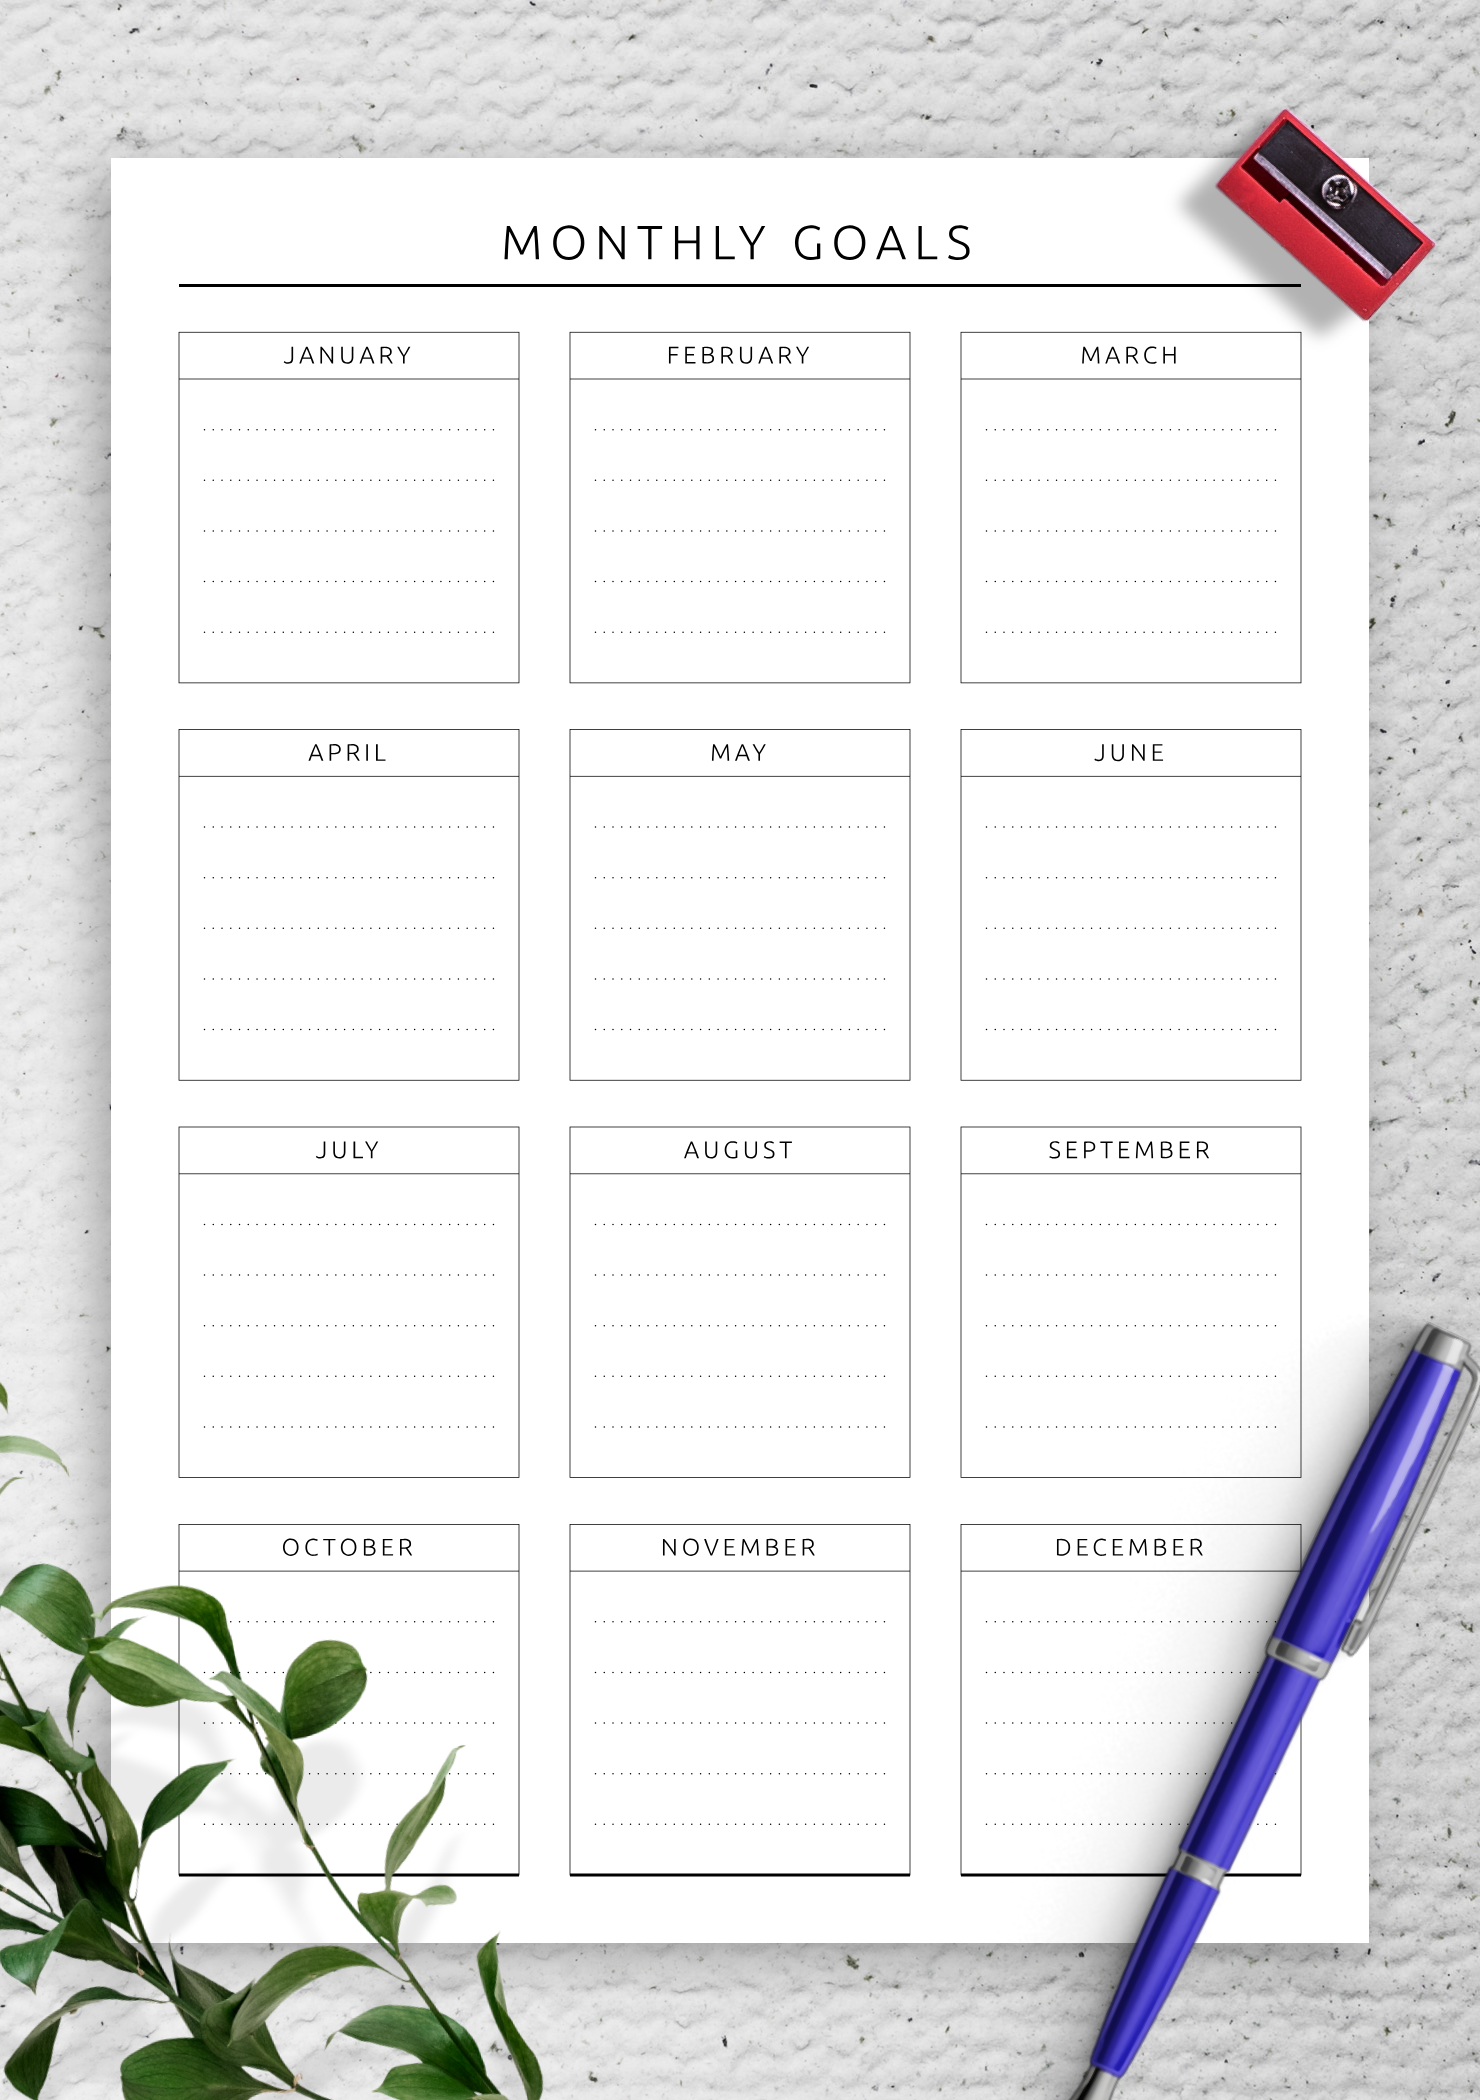 Download Printable Monthly Goals List for a Year PDF